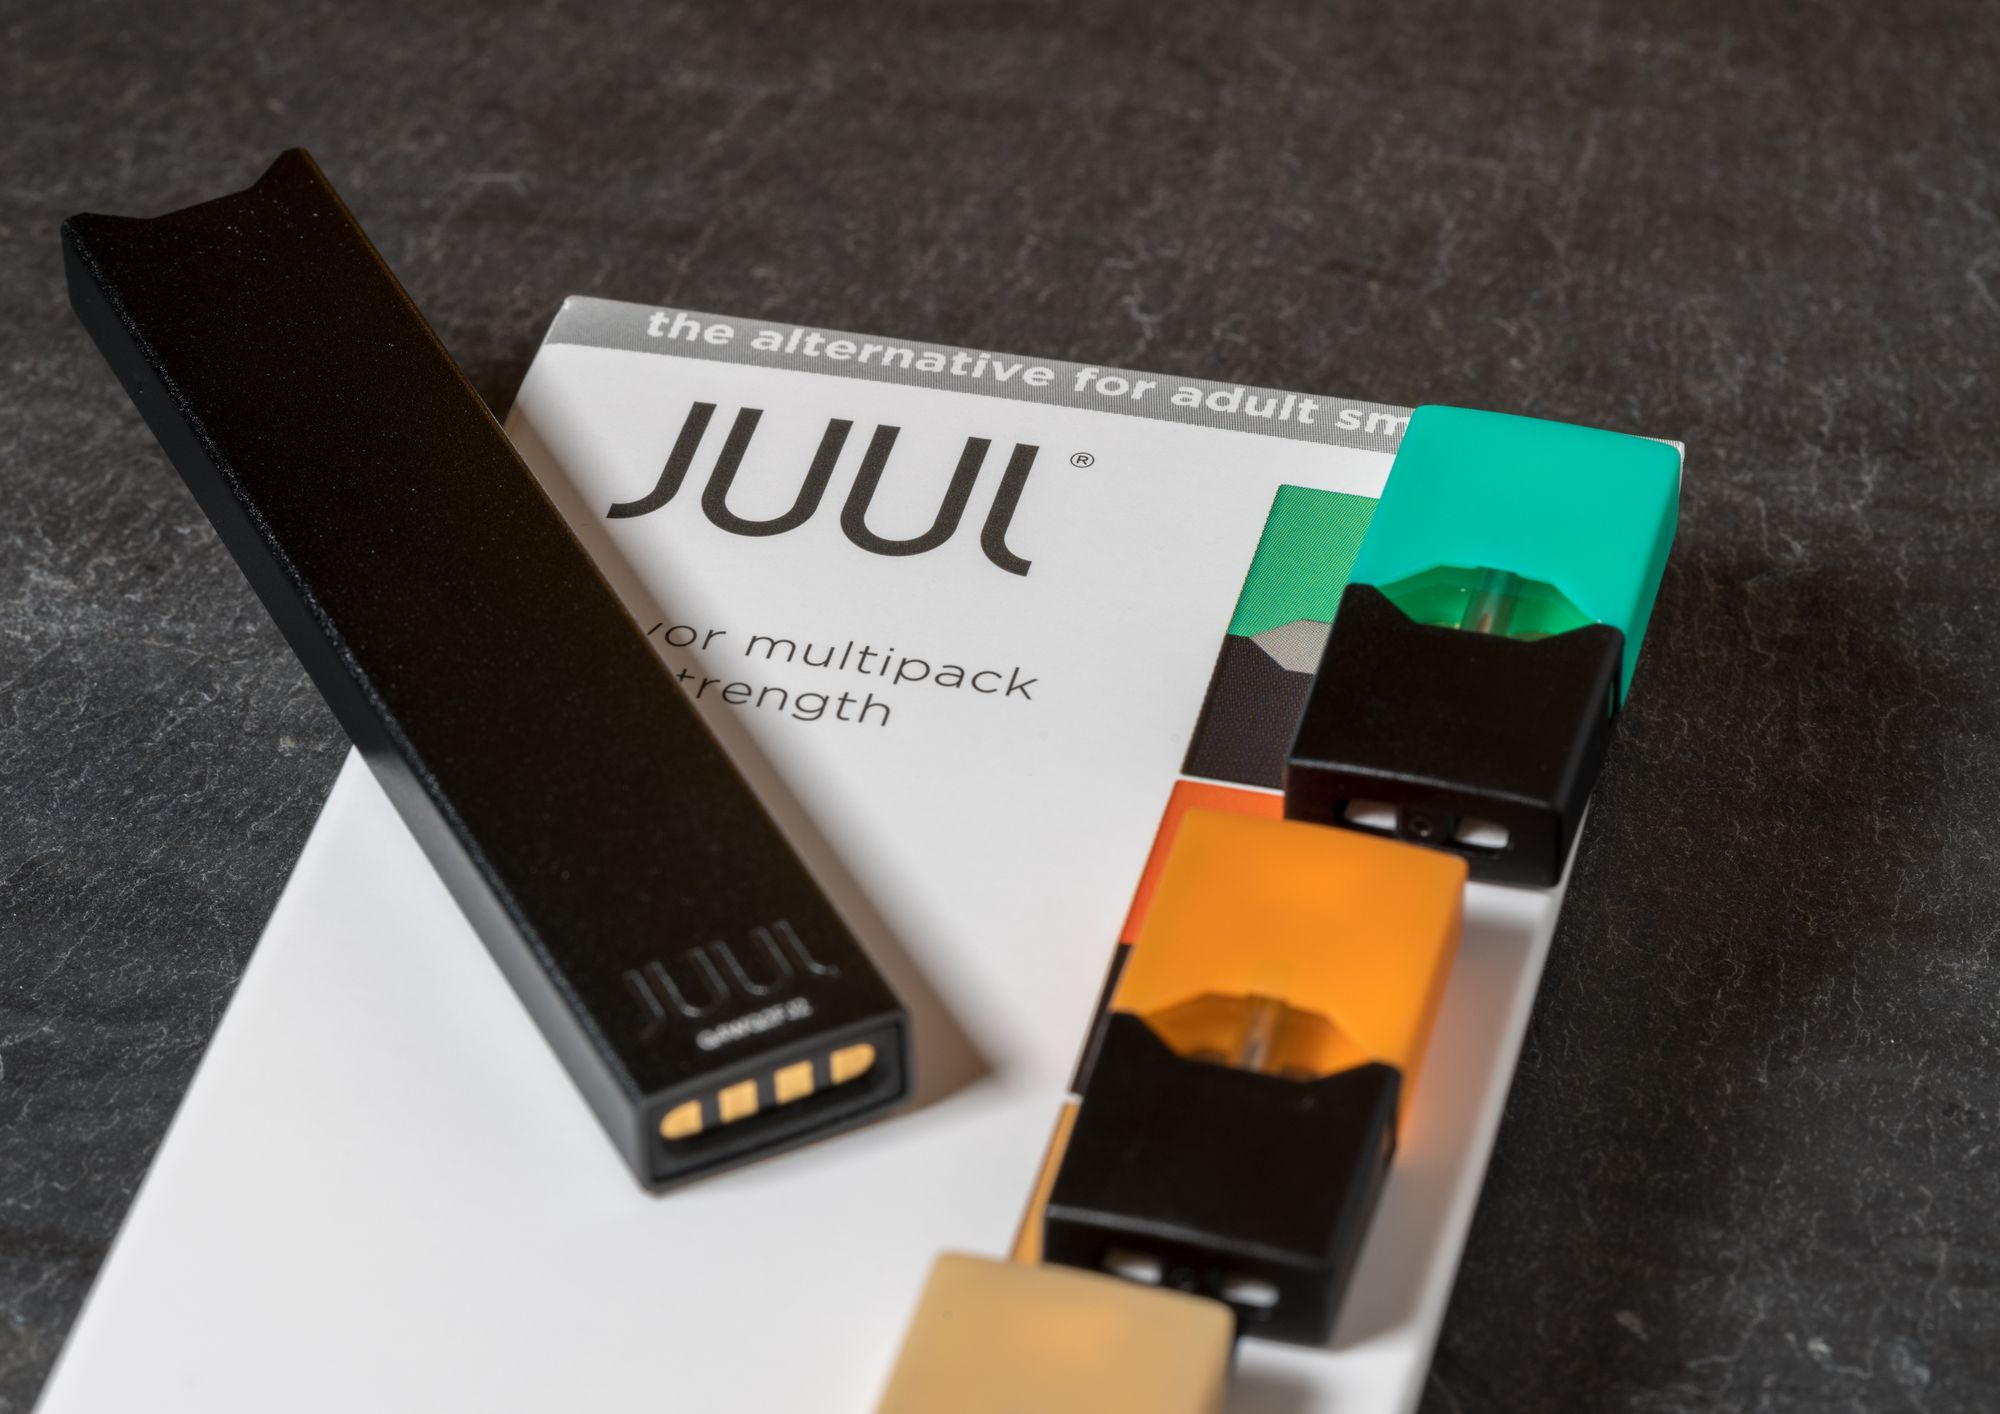 Only One Week Remains to File a Claim in the $255M Juul Class Action Settlement - No Proof Required!